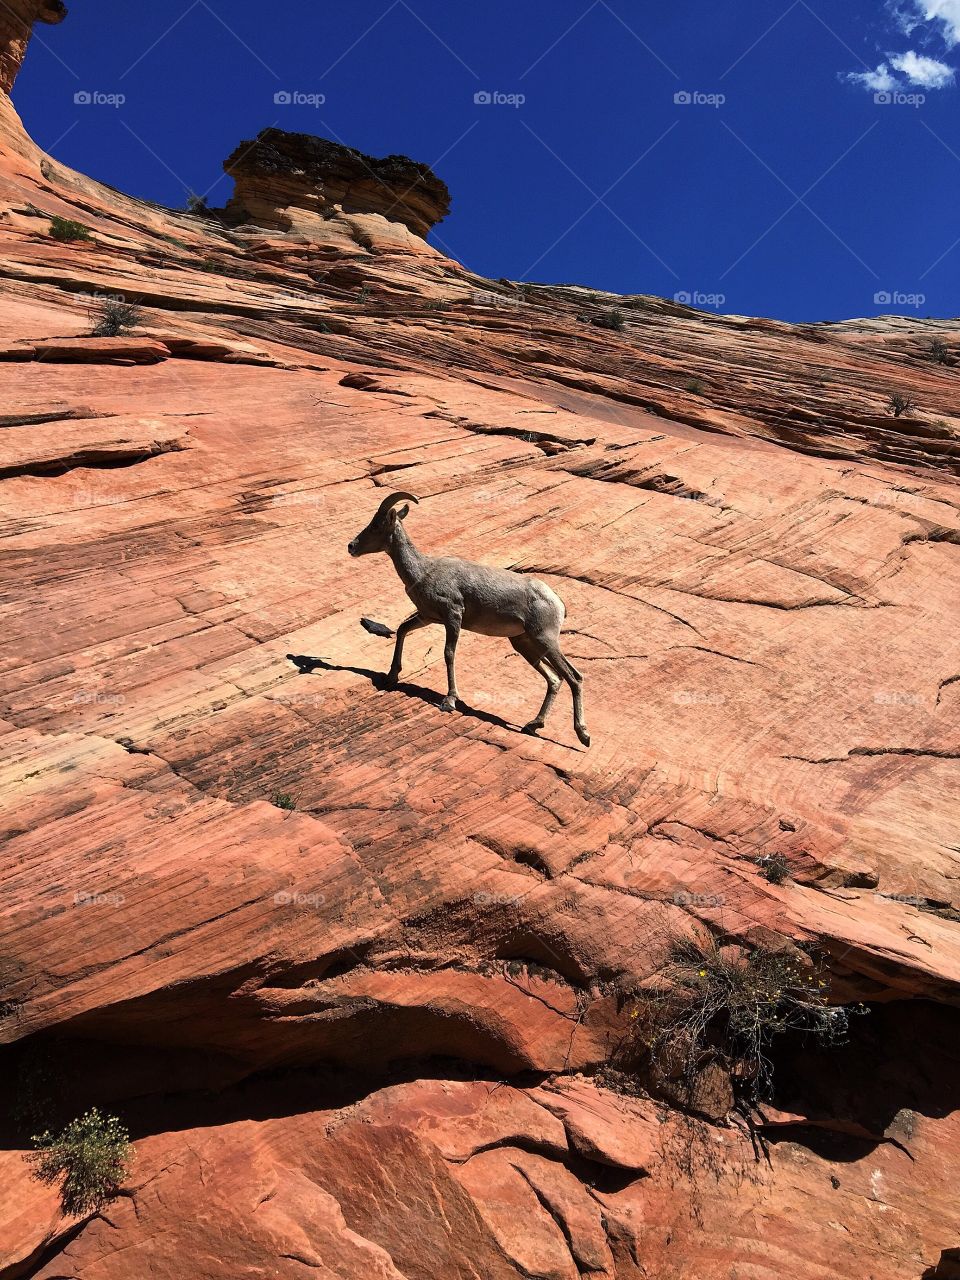 Nature is a beautiful thing to have in this world, in this shot, the dry heat is giving us an ocean blue sky and cool breeze. Take a look at this goat as he climbs up this steep slope. This photo was taken at Zion National Park in September 